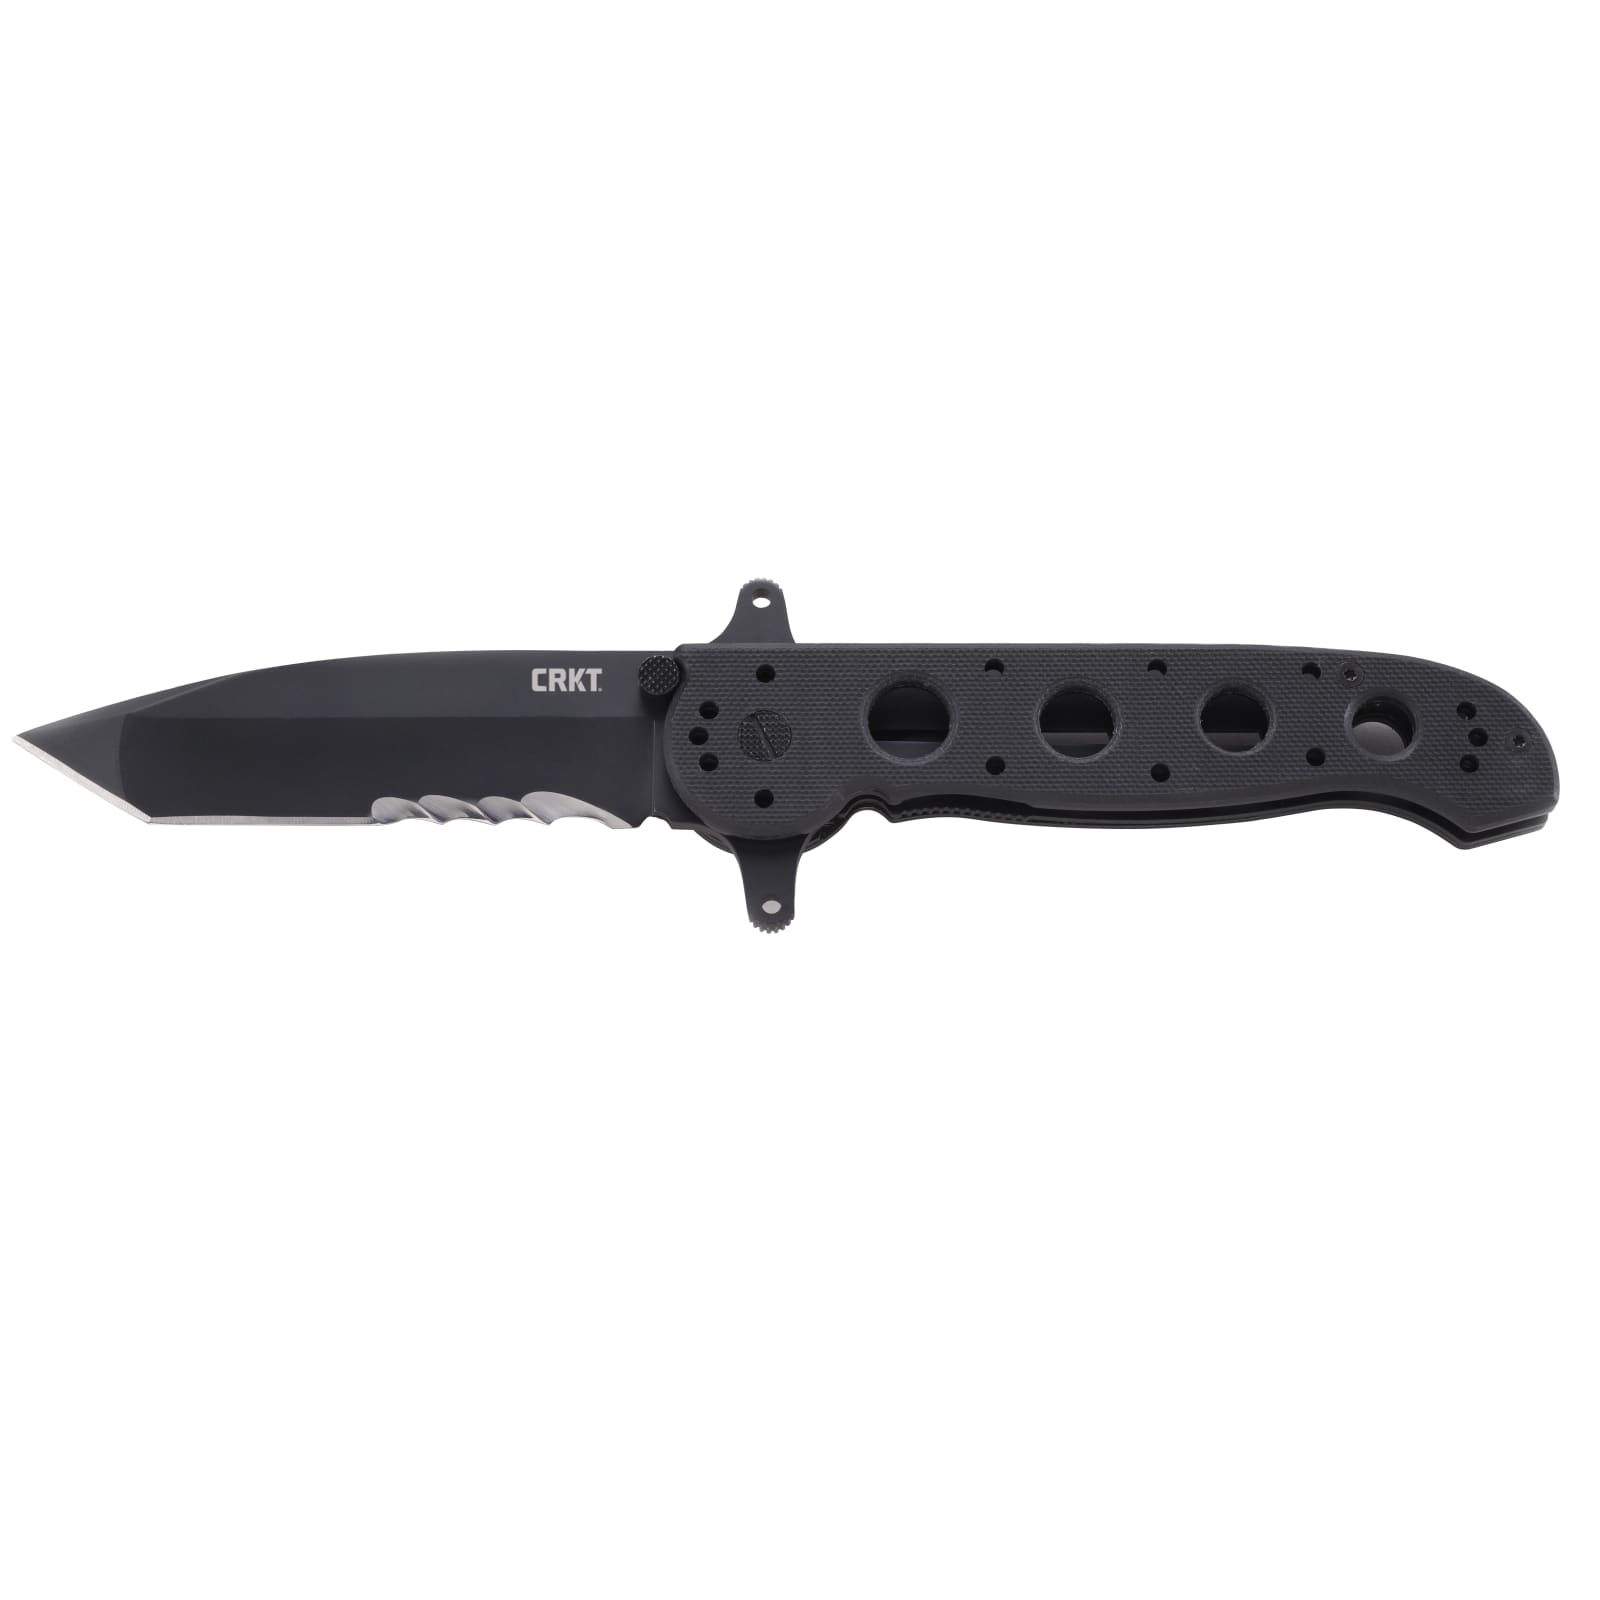 M16-14SFG Special Forces Tanto Large w/Veff Serrations Folding